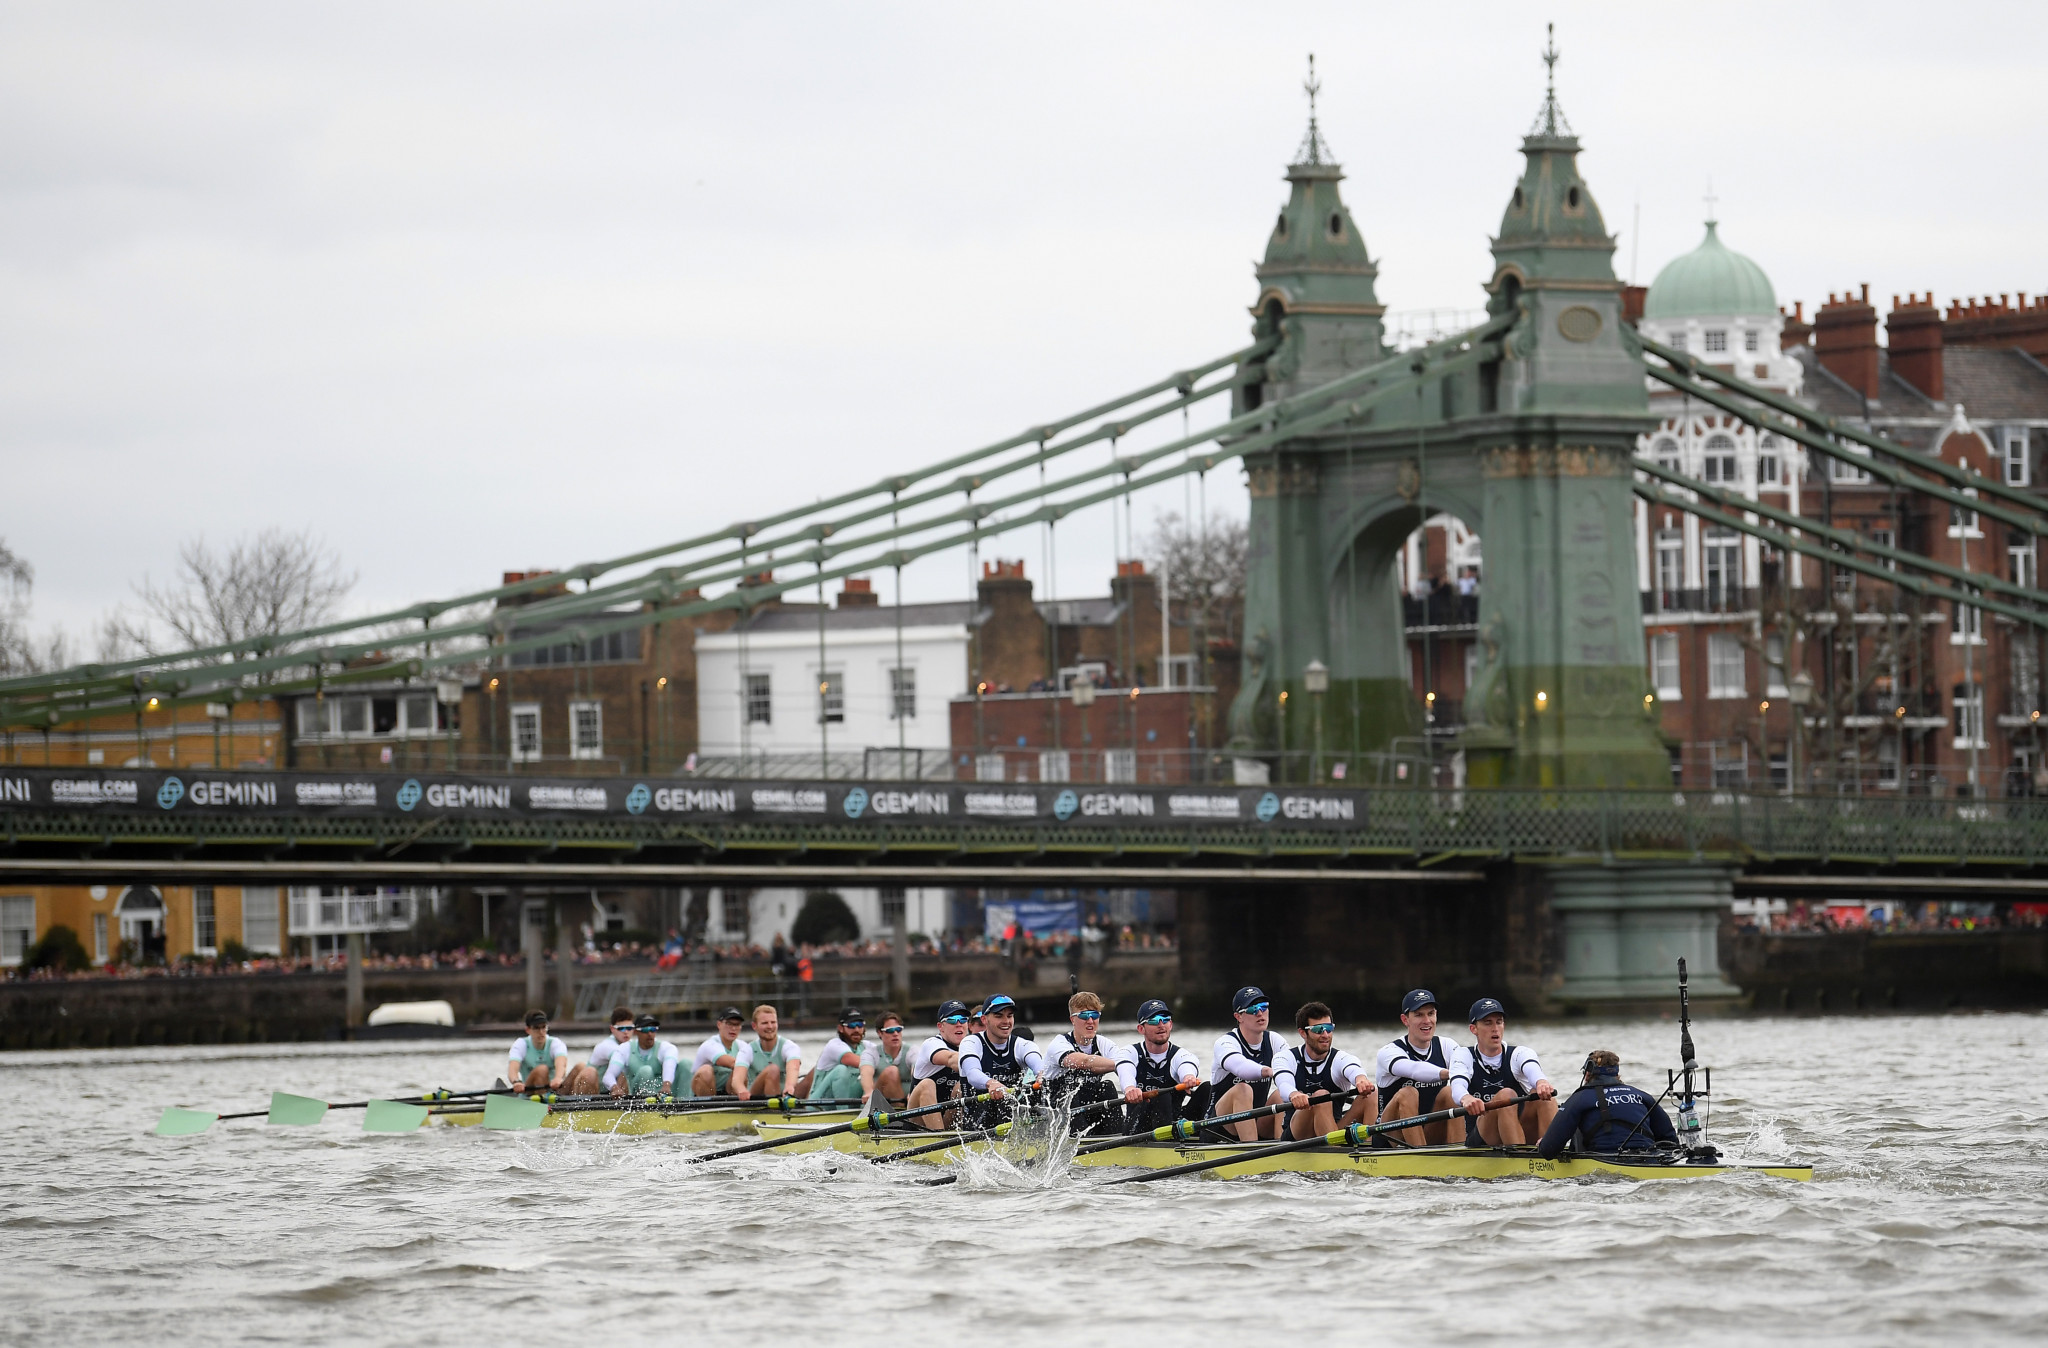 Cambridge won both the men's and women's events in this year's Boat Races ©Getty Images